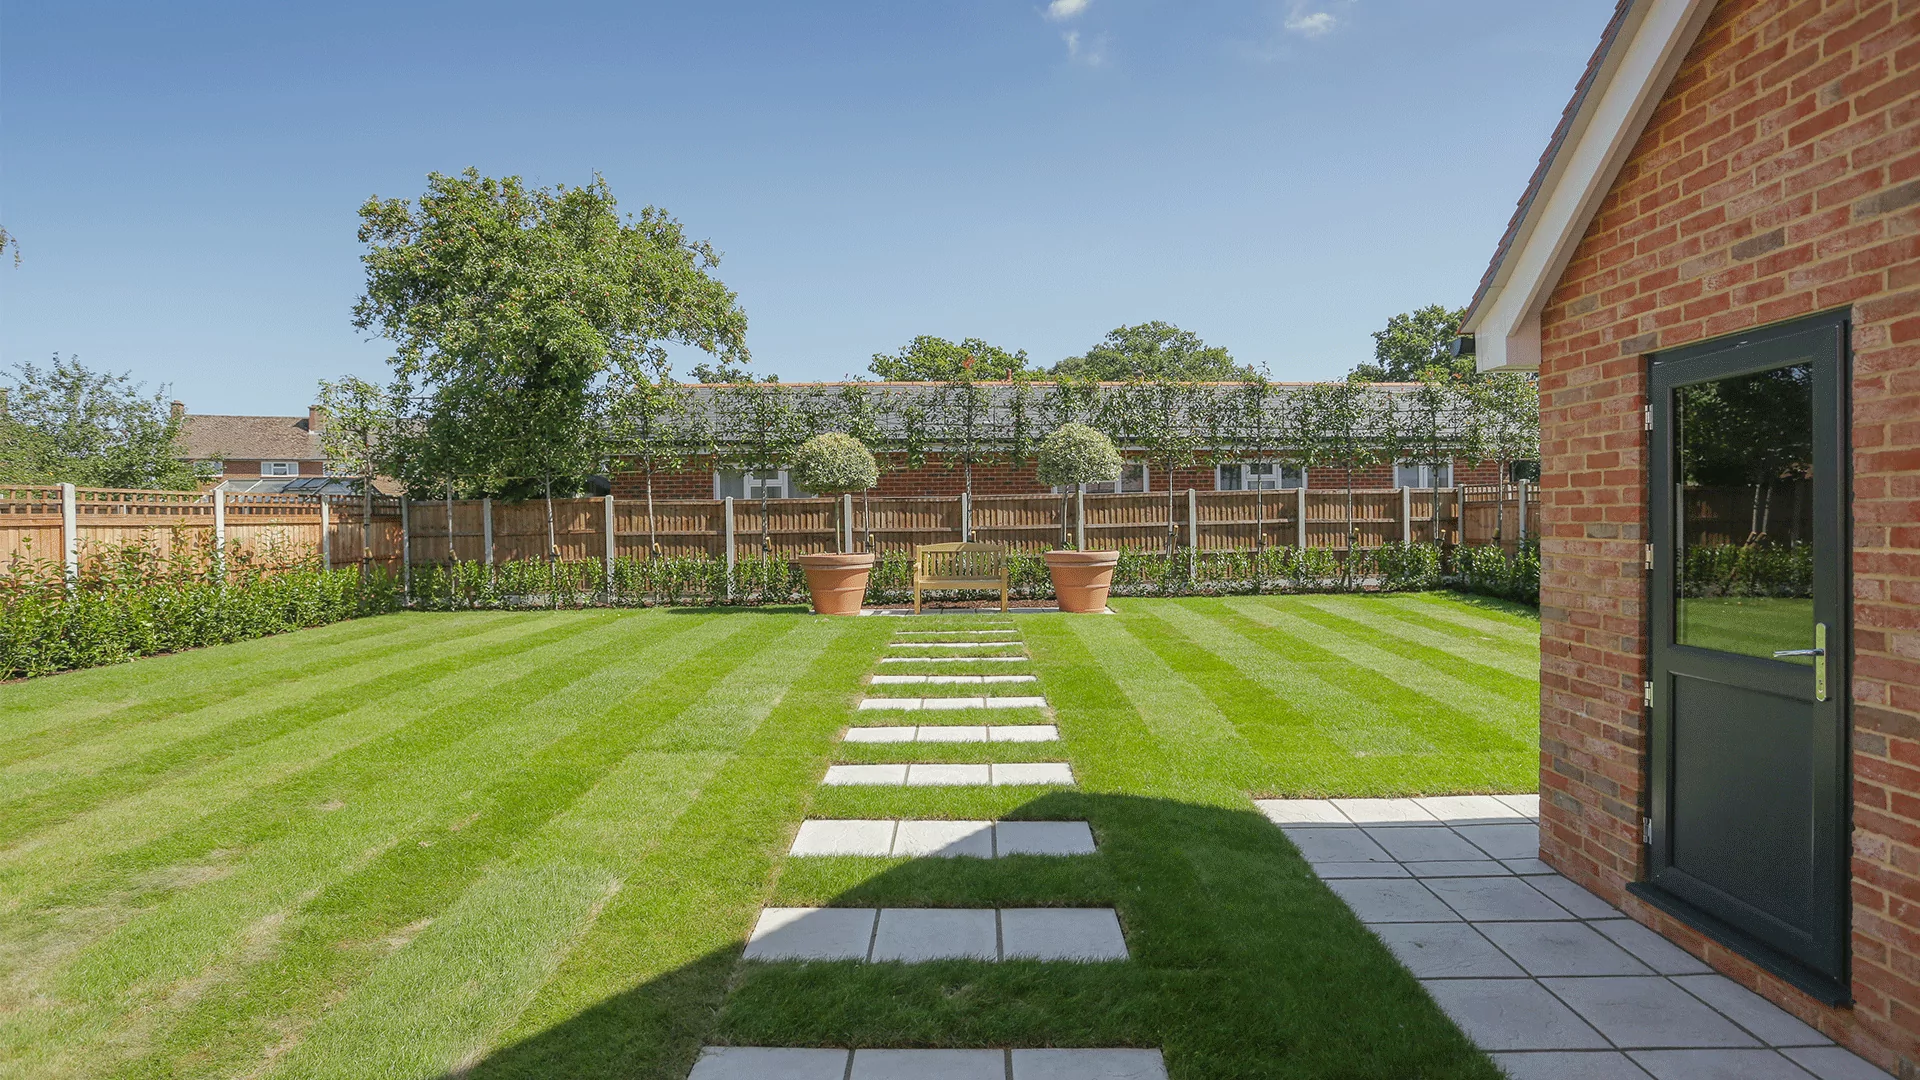 Miller's Meadow - Plot 8 Garden with a central path through grass and bench feature at the end